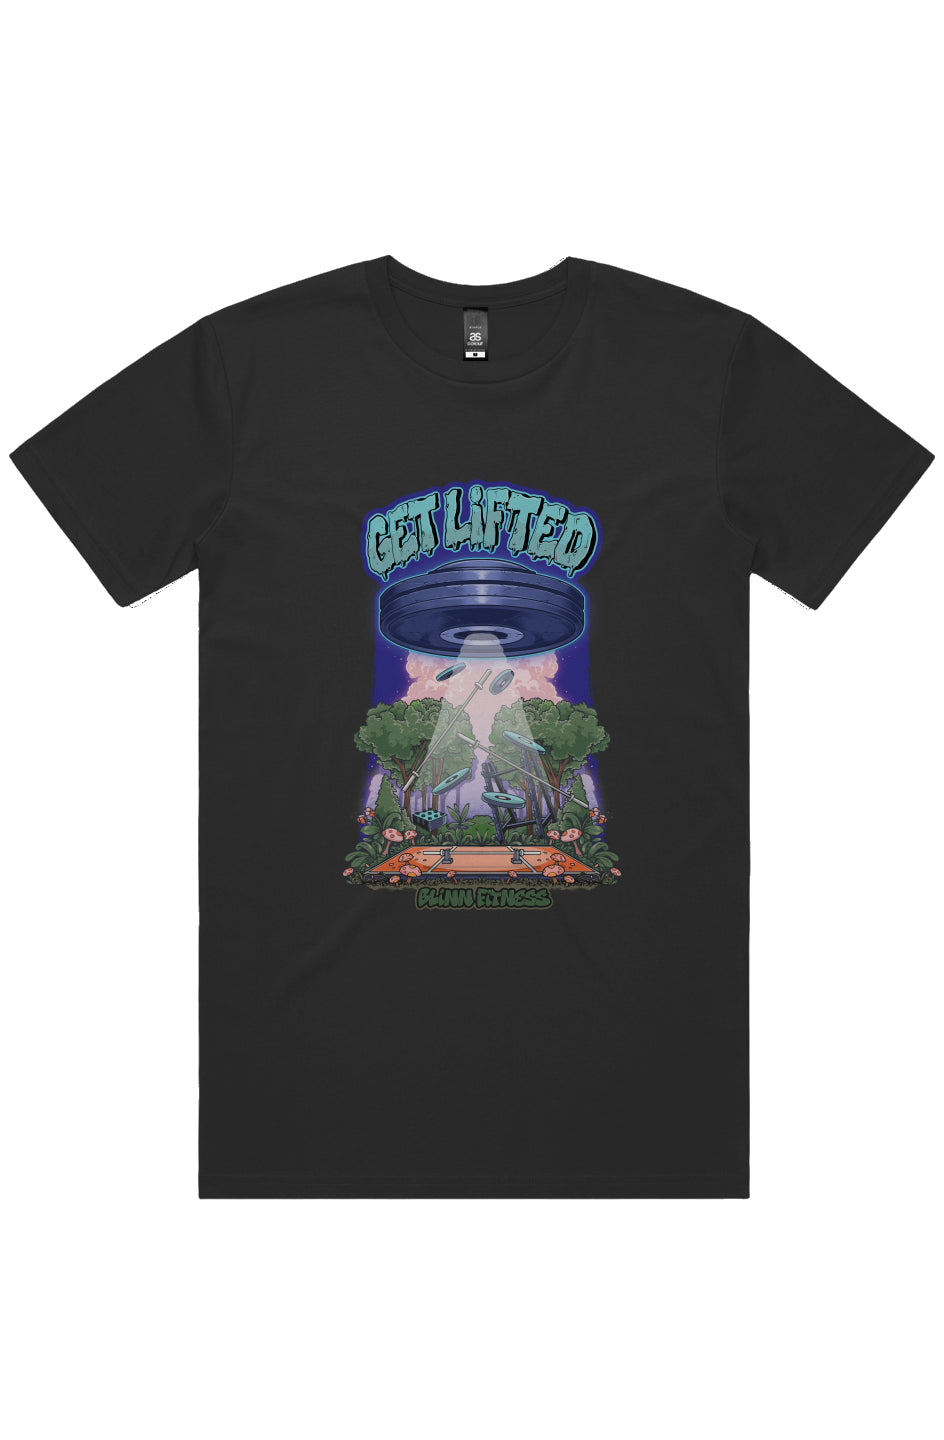 Get Lifted Tee